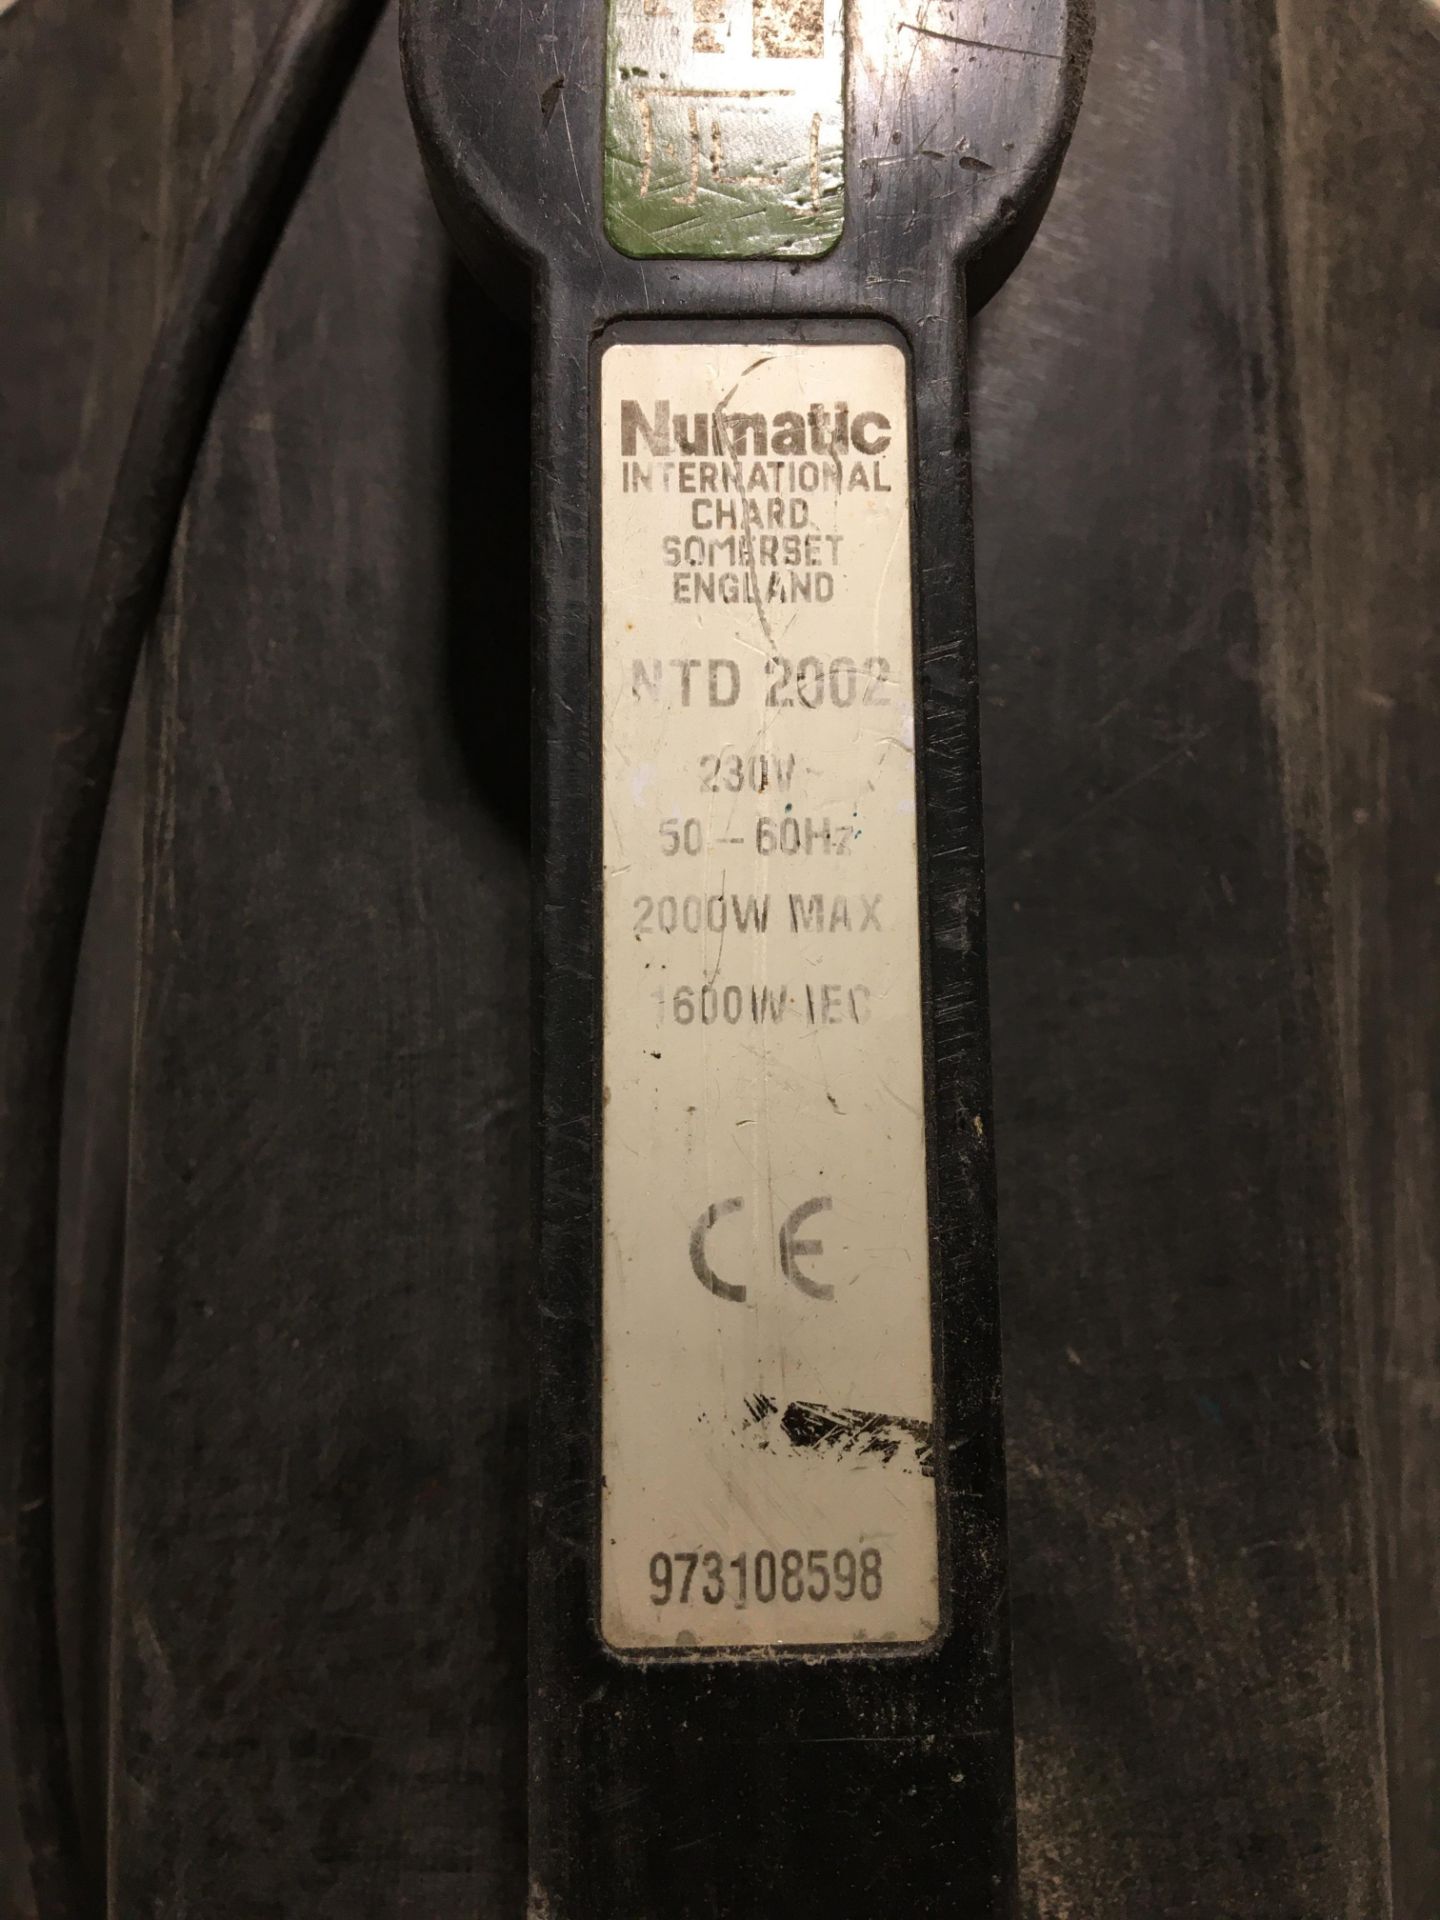 Numatic NTD 2002 trolley mounted 230V industrial vacuum, Serial No. 973108598 (Location: Brent) - Image 2 of 4